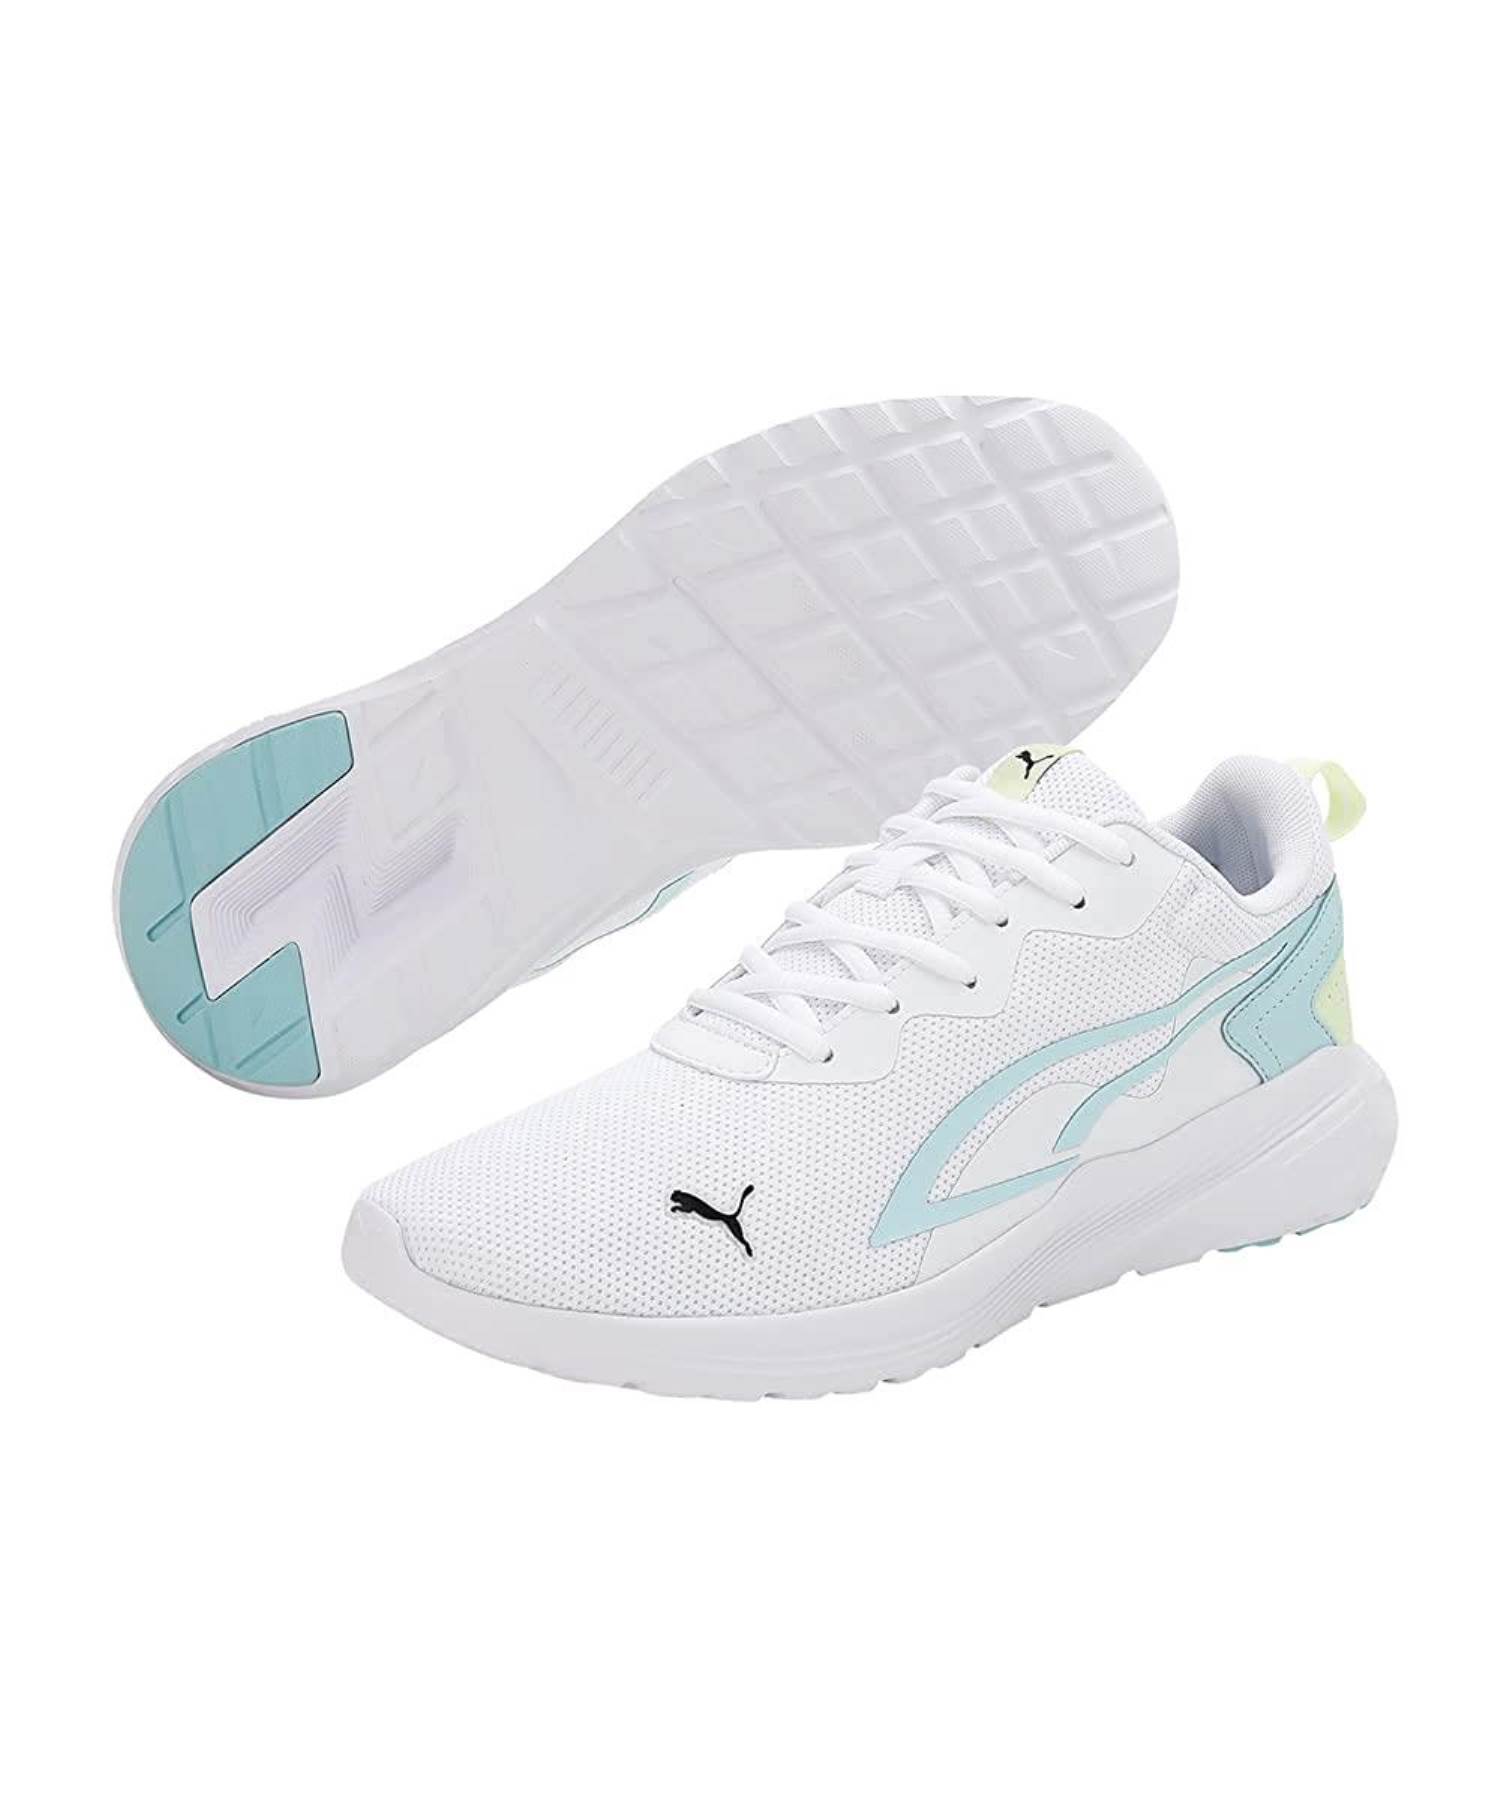 https://www.rajashoes.in/VendorAssets/1029/StoreImages/Large/123ALL-DAY-ACTIVEWHITE.jpg